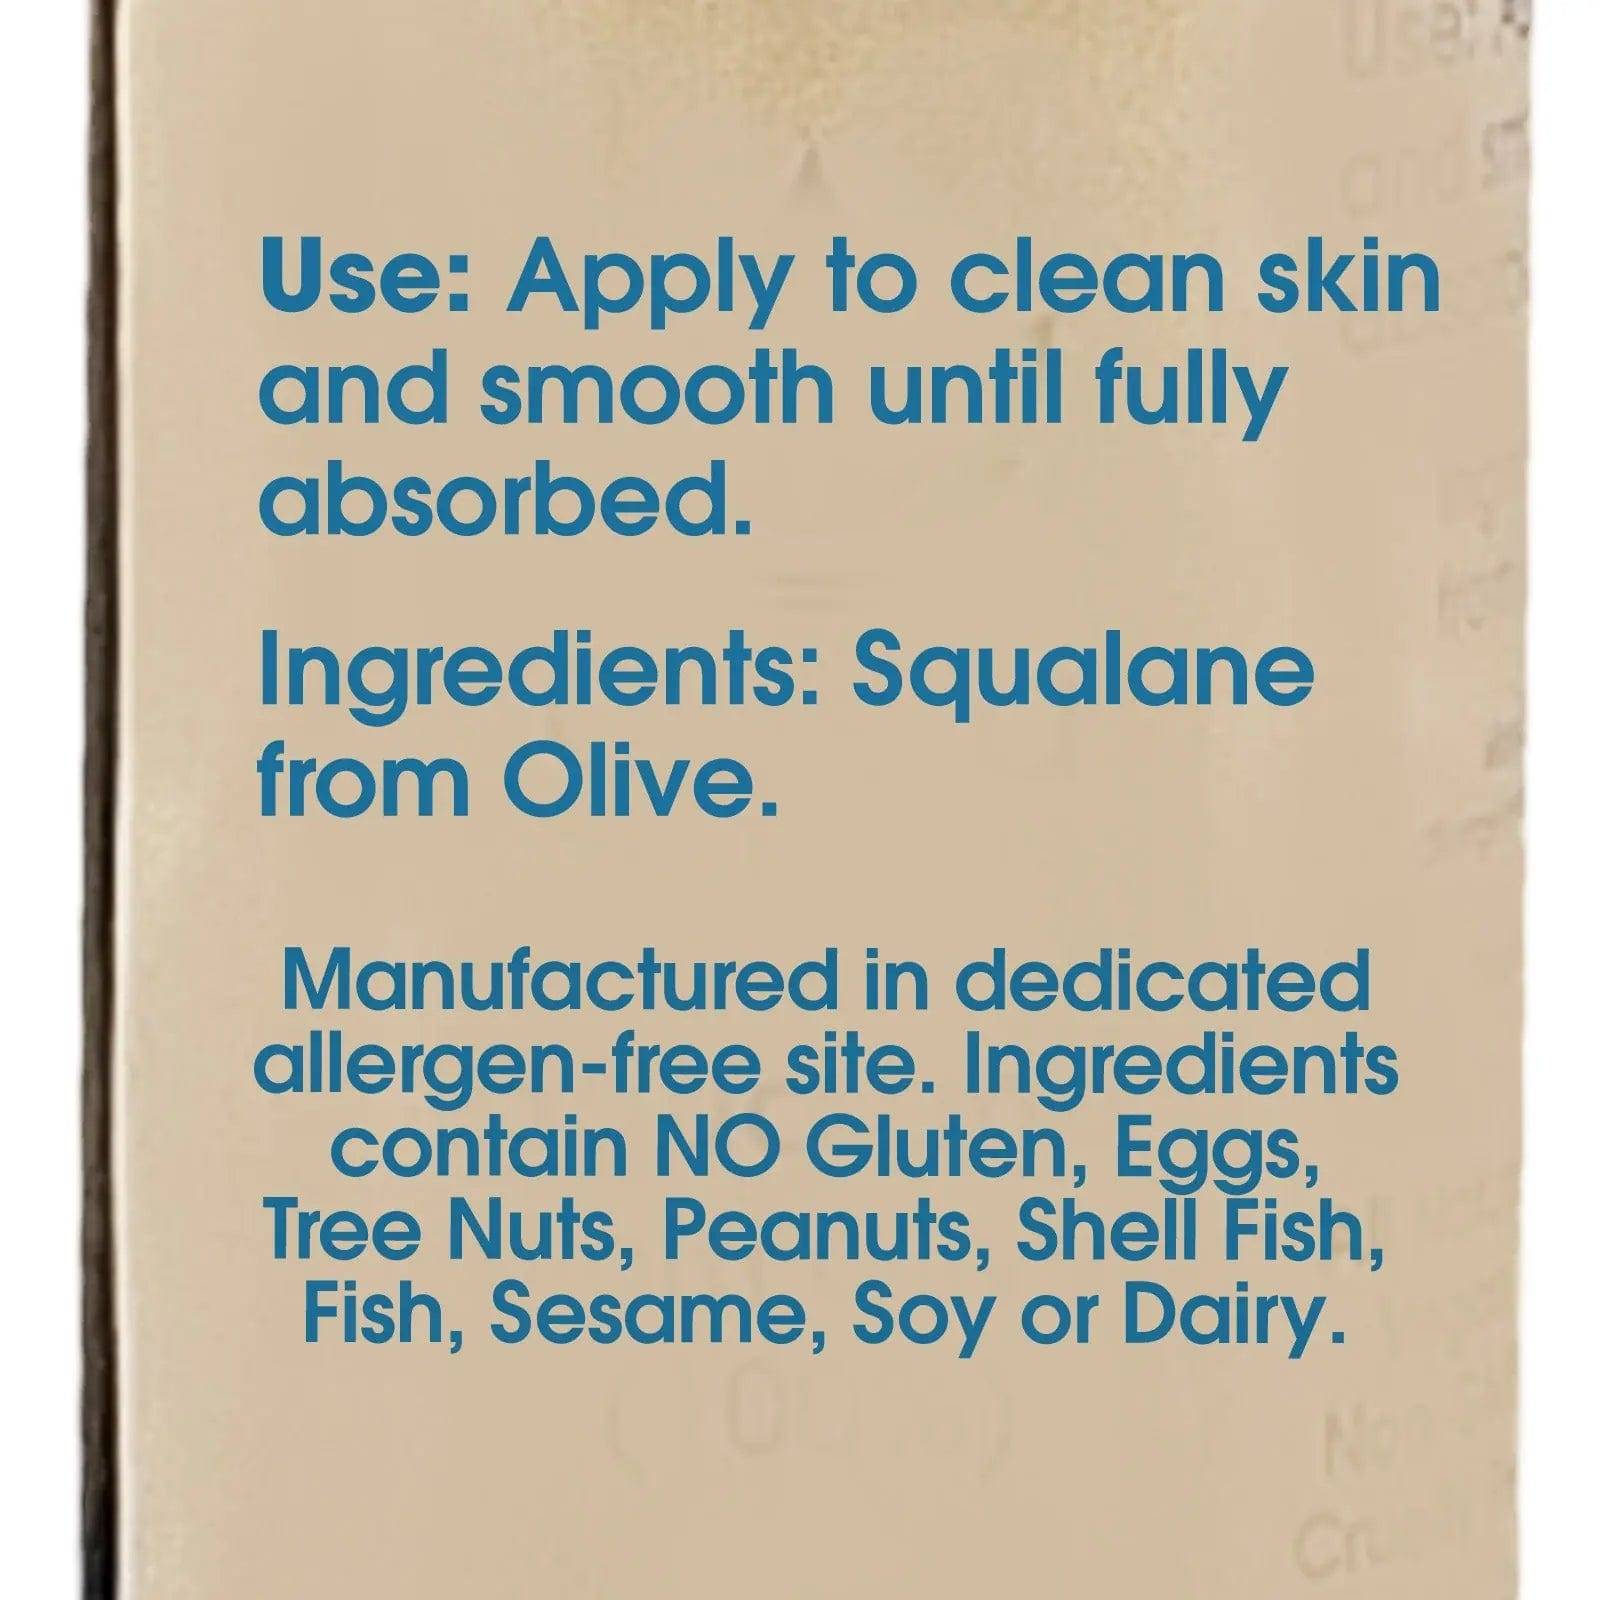 Olive Squalane defines youthful beauty as abundant when young Ceela Naturals